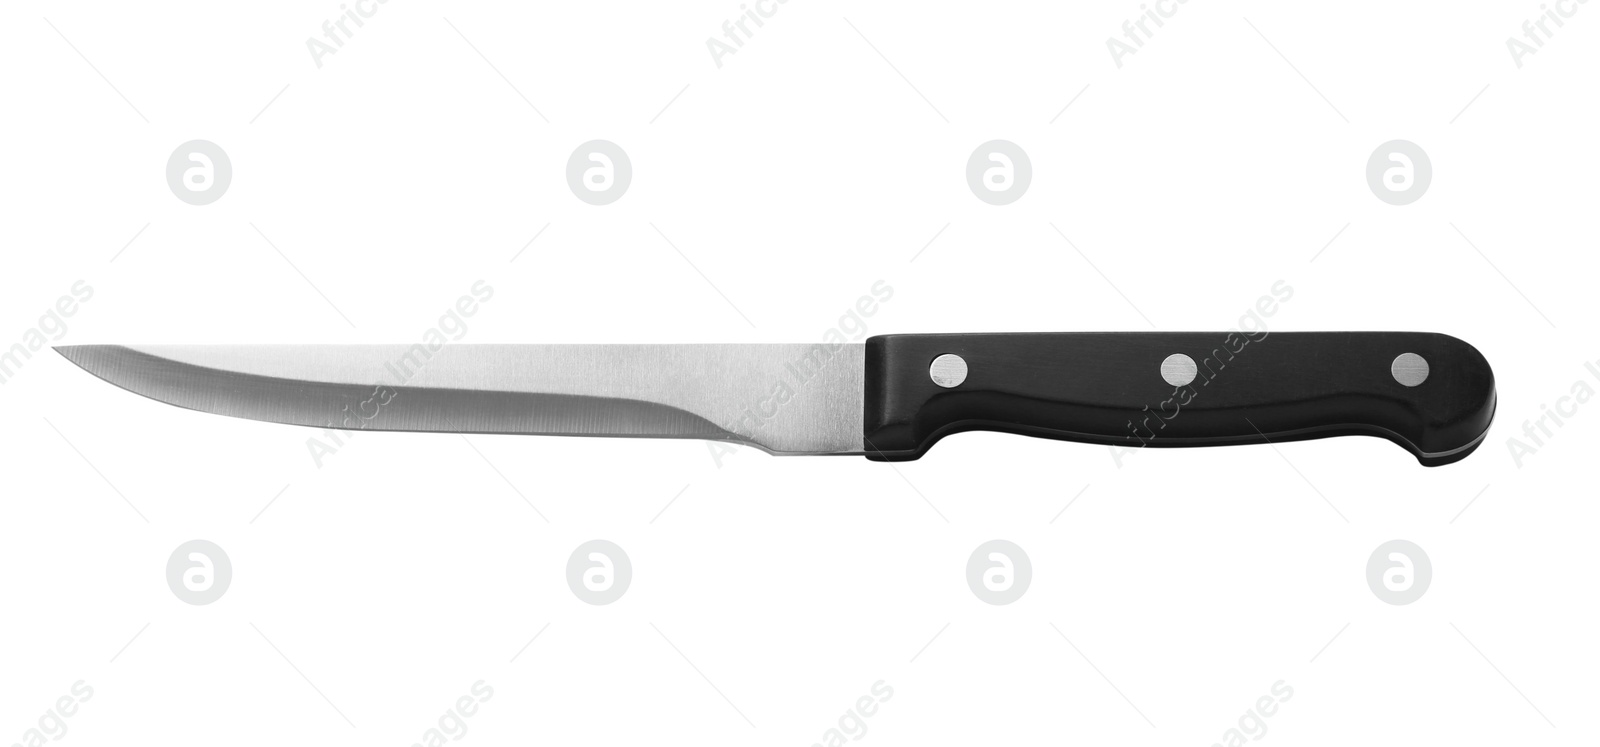 Photo of Stainless steel carving knife with plastic handle isolated on white